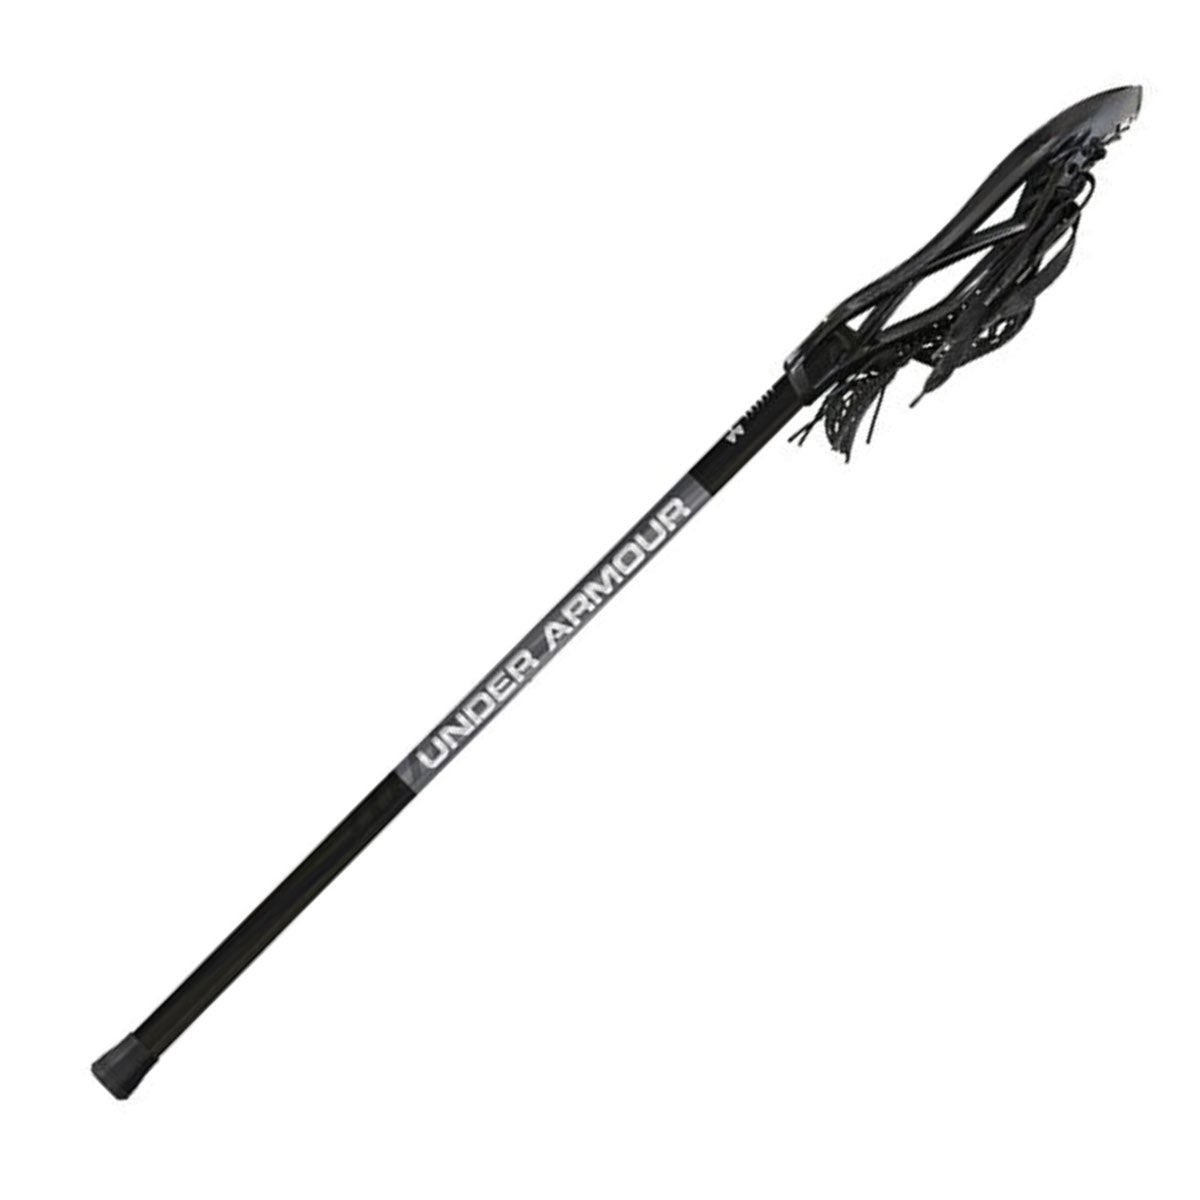 Under Armour Strategy 2 Men's Complete Lacrosse Stick in black